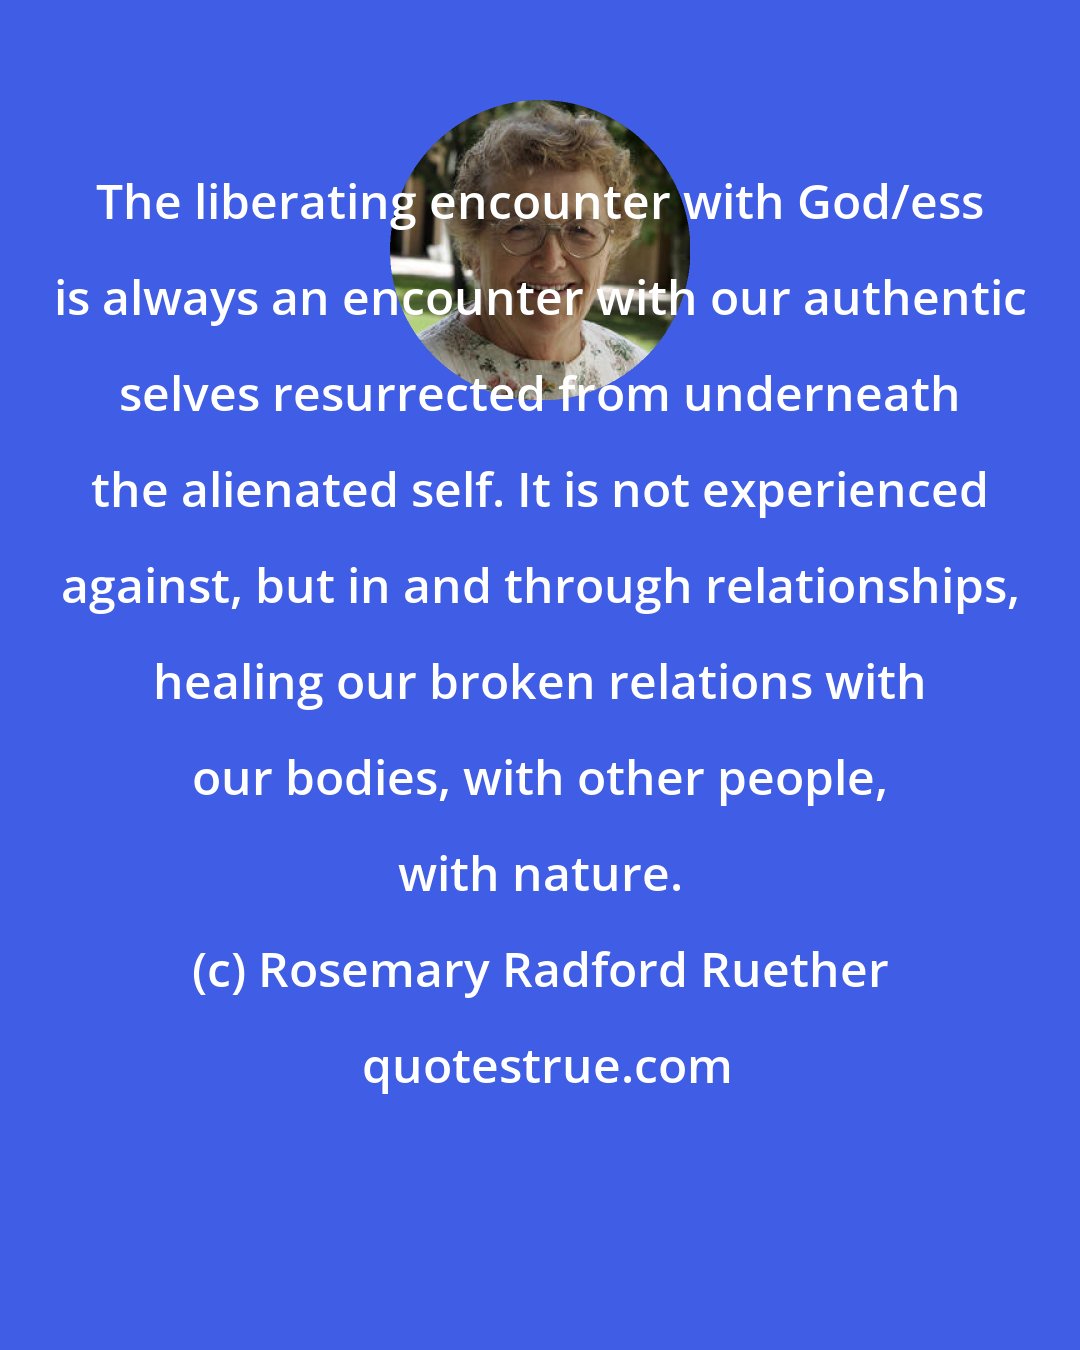 Rosemary Radford Ruether: The liberating encounter with God/ess is always an encounter with our authentic selves resurrected from underneath the alienated self. It is not experienced against, but in and through relationships, healing our broken relations with our bodies, with other people, with nature.